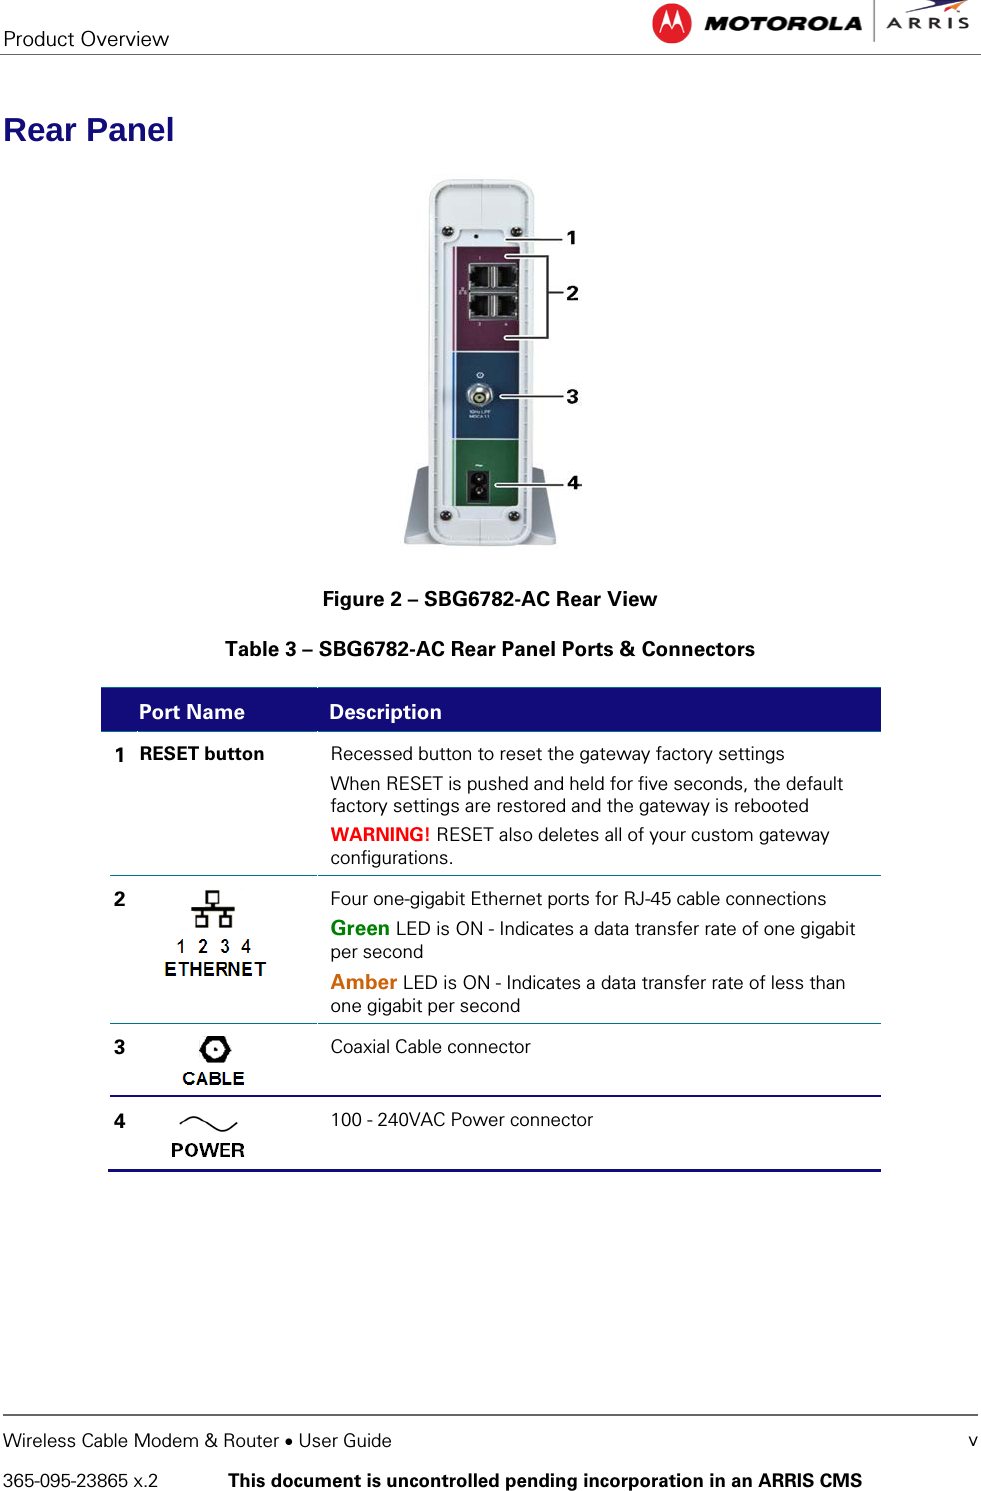 Product Overview   Wireless Cable Modem &amp; Router • User Guide v 365-095-23865 x.2   This document is uncontrolled pending incorporation in an ARRIS CMS  Rear Panel  Figure 2 – SBG6782-AC Rear View Table 3 – SBG6782-AC Rear Panel Ports &amp; Connectors  Port Name Description 1  RESET button Recessed button to reset the gateway factory settings When RESET is pushed and held for five seconds, the default factory settings are restored and the gateway is rebooted WARNING! RESET also deletes all of your custom gateway configurations. 2  Four one-gigabit Ethernet ports for RJ-45 cable connections Green LED is ON - Indicates a data transfer rate of one gigabit per second Amber LED is ON - Indicates a data transfer rate of less than one gigabit per second 3  Coaxial Cable connector 4  100 - 240VAC Power connector 